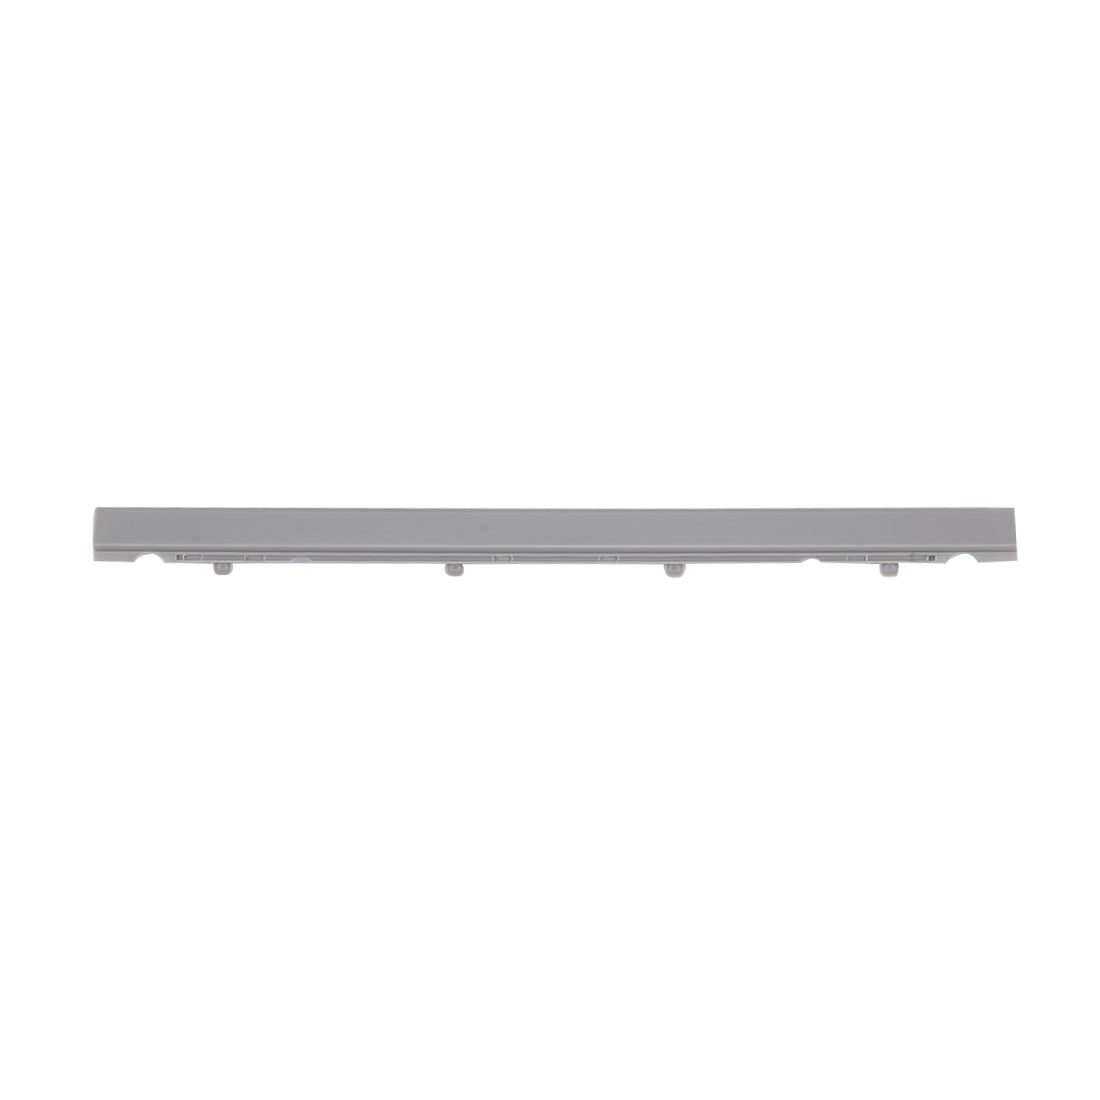 Spindle Cover Apple MacBook Air 13.3 A1237 A1304 2008 2009